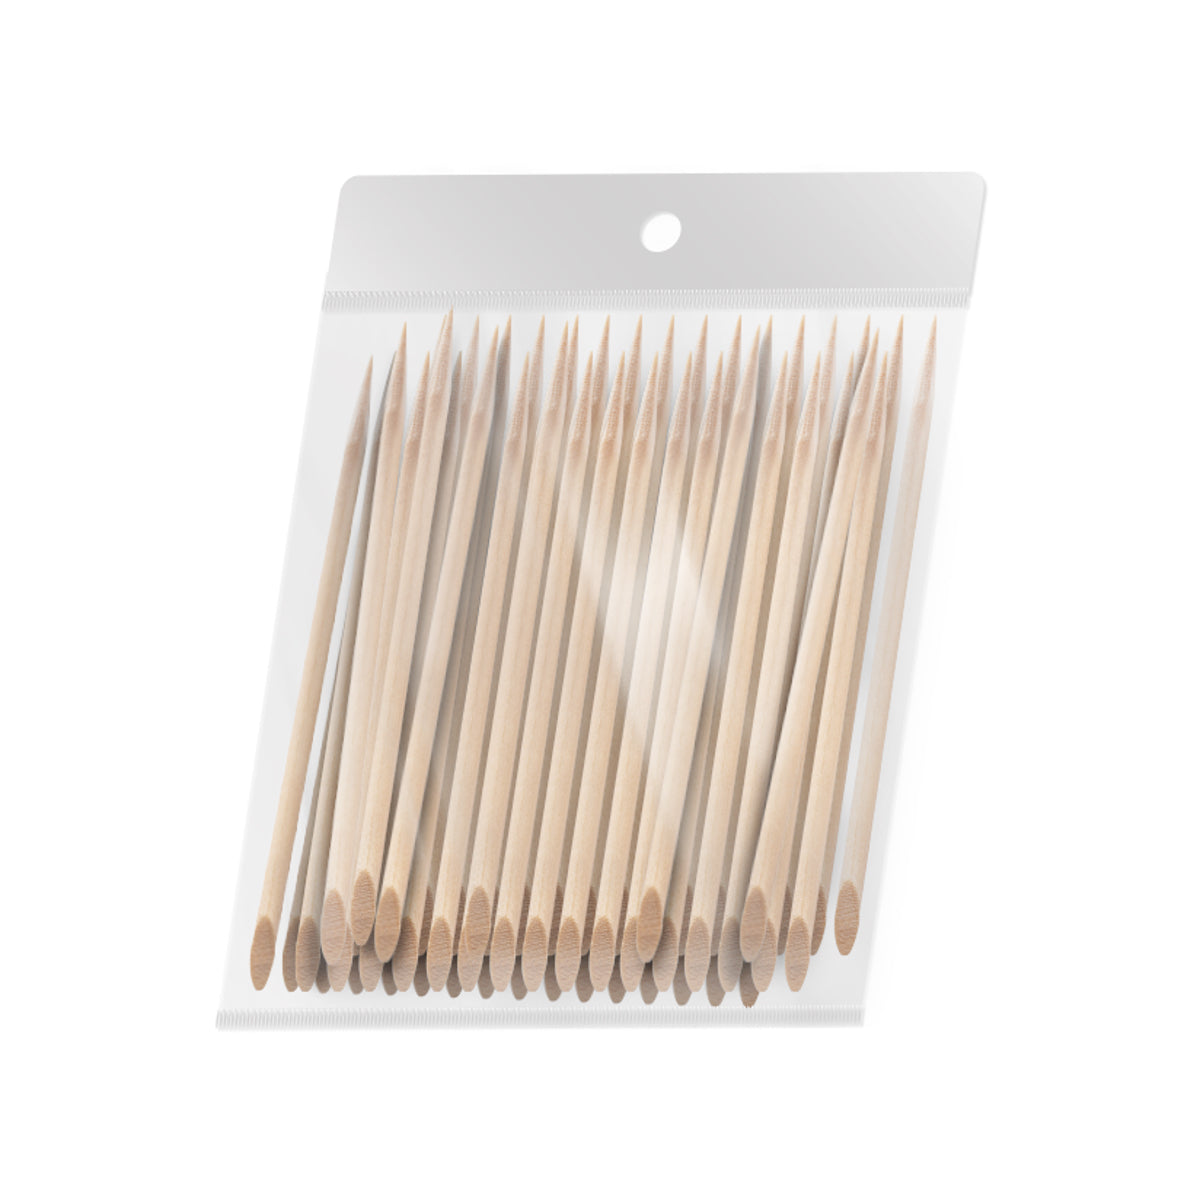 Pack of 100 wooden sticks for manicure cuticles 11.5 cm OCHO NAILS